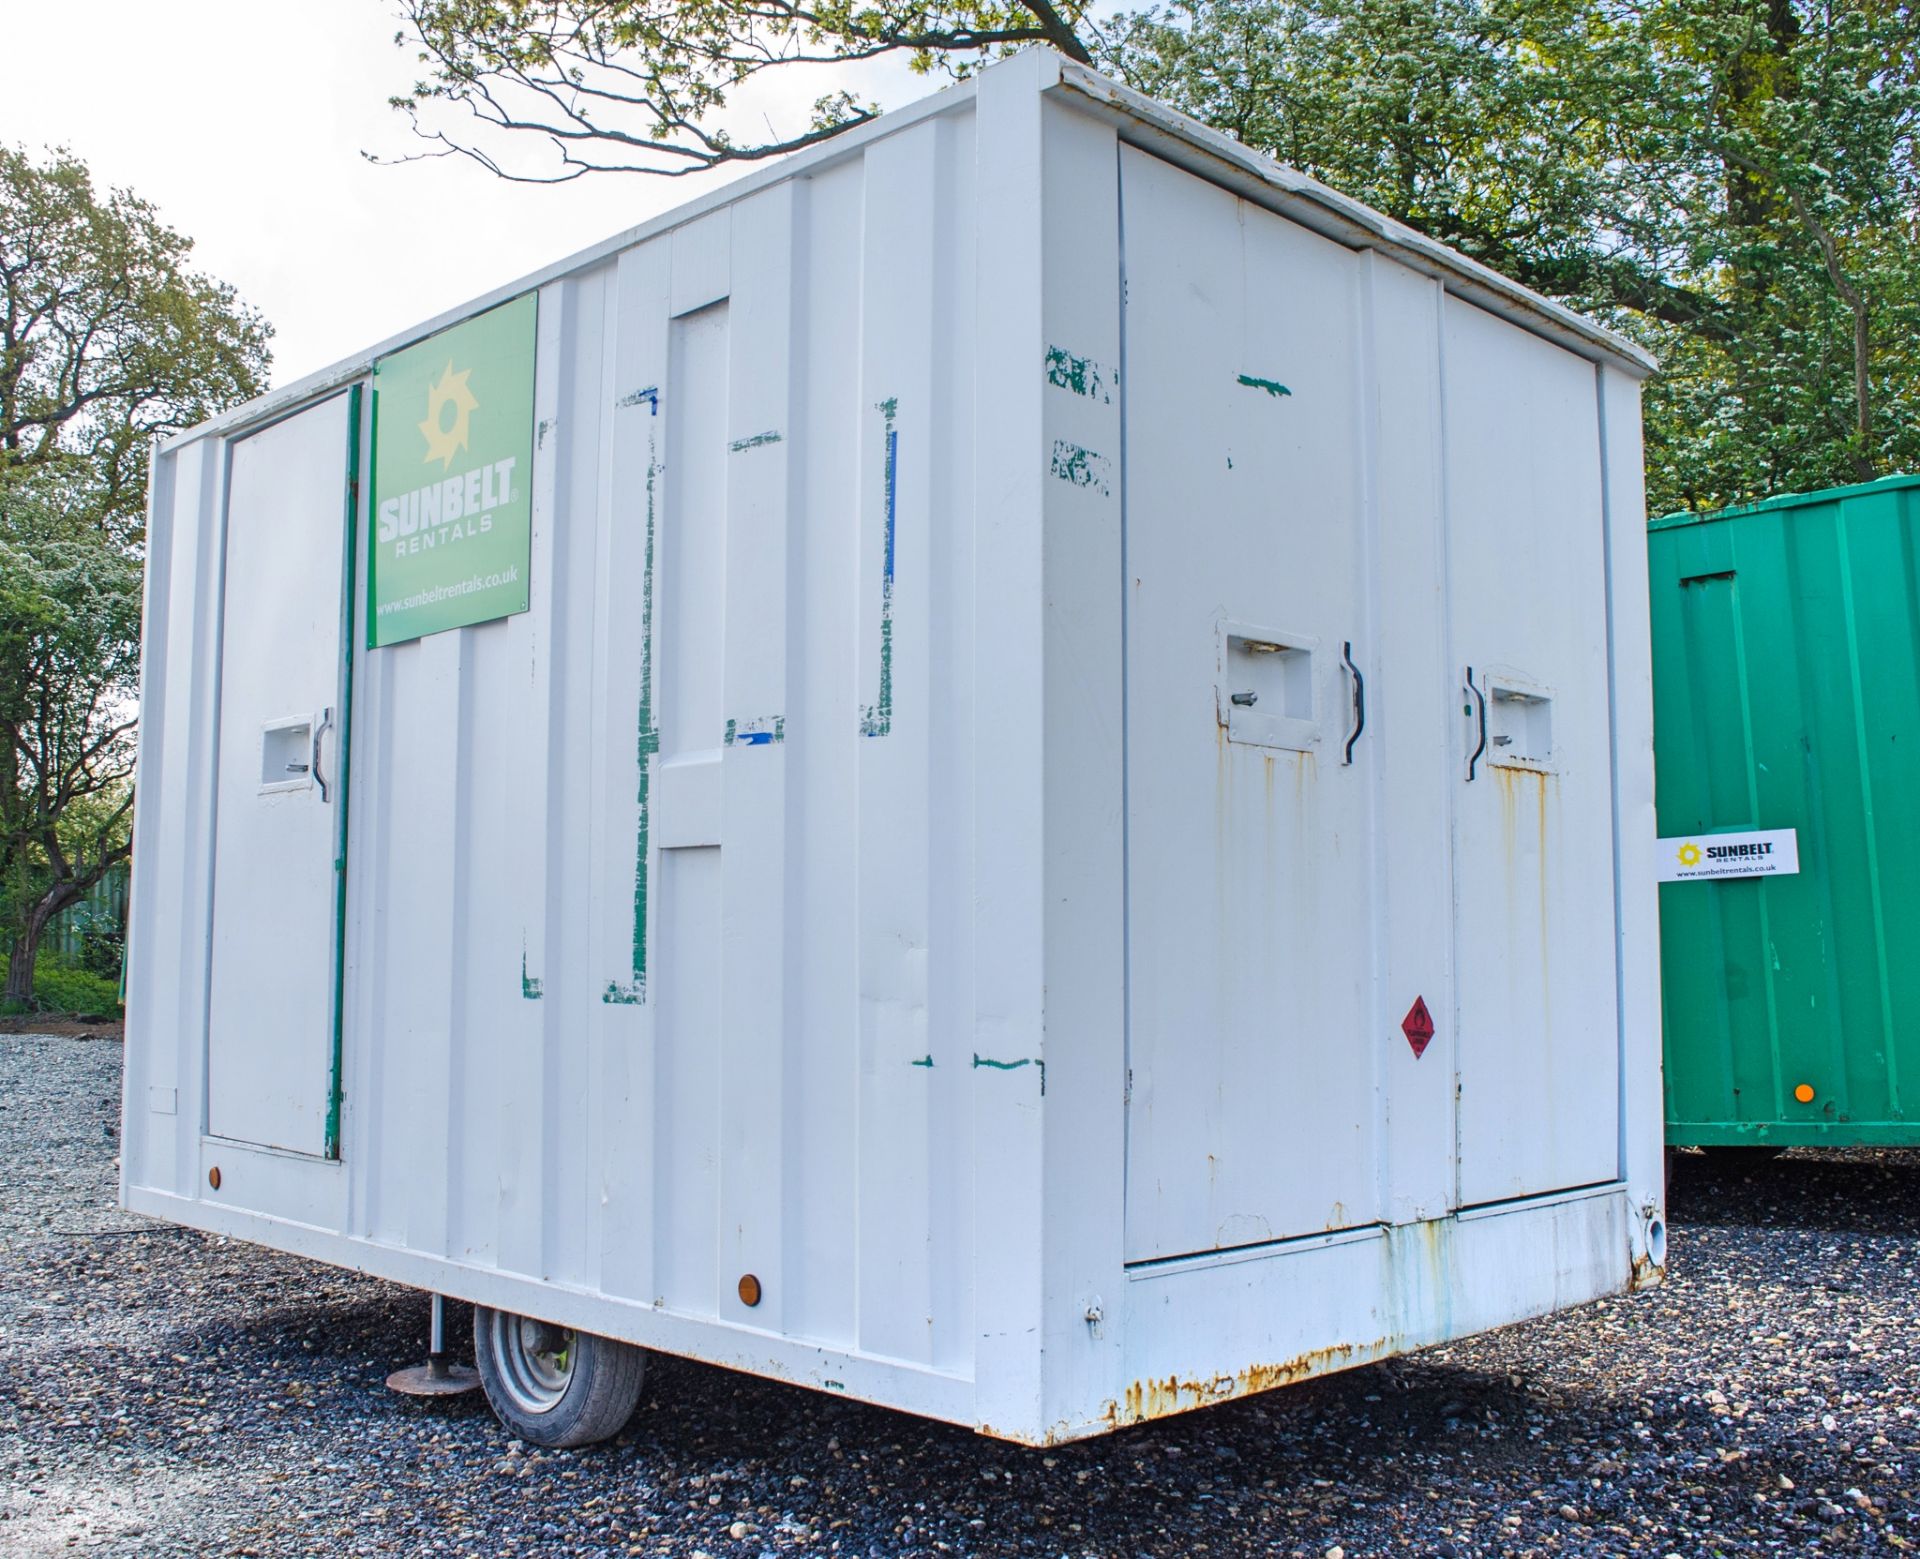 Groundhog 12 ft x 8 ft mobile welfare unit Comprising of: canteen area, toilet & generator room - Image 6 of 12